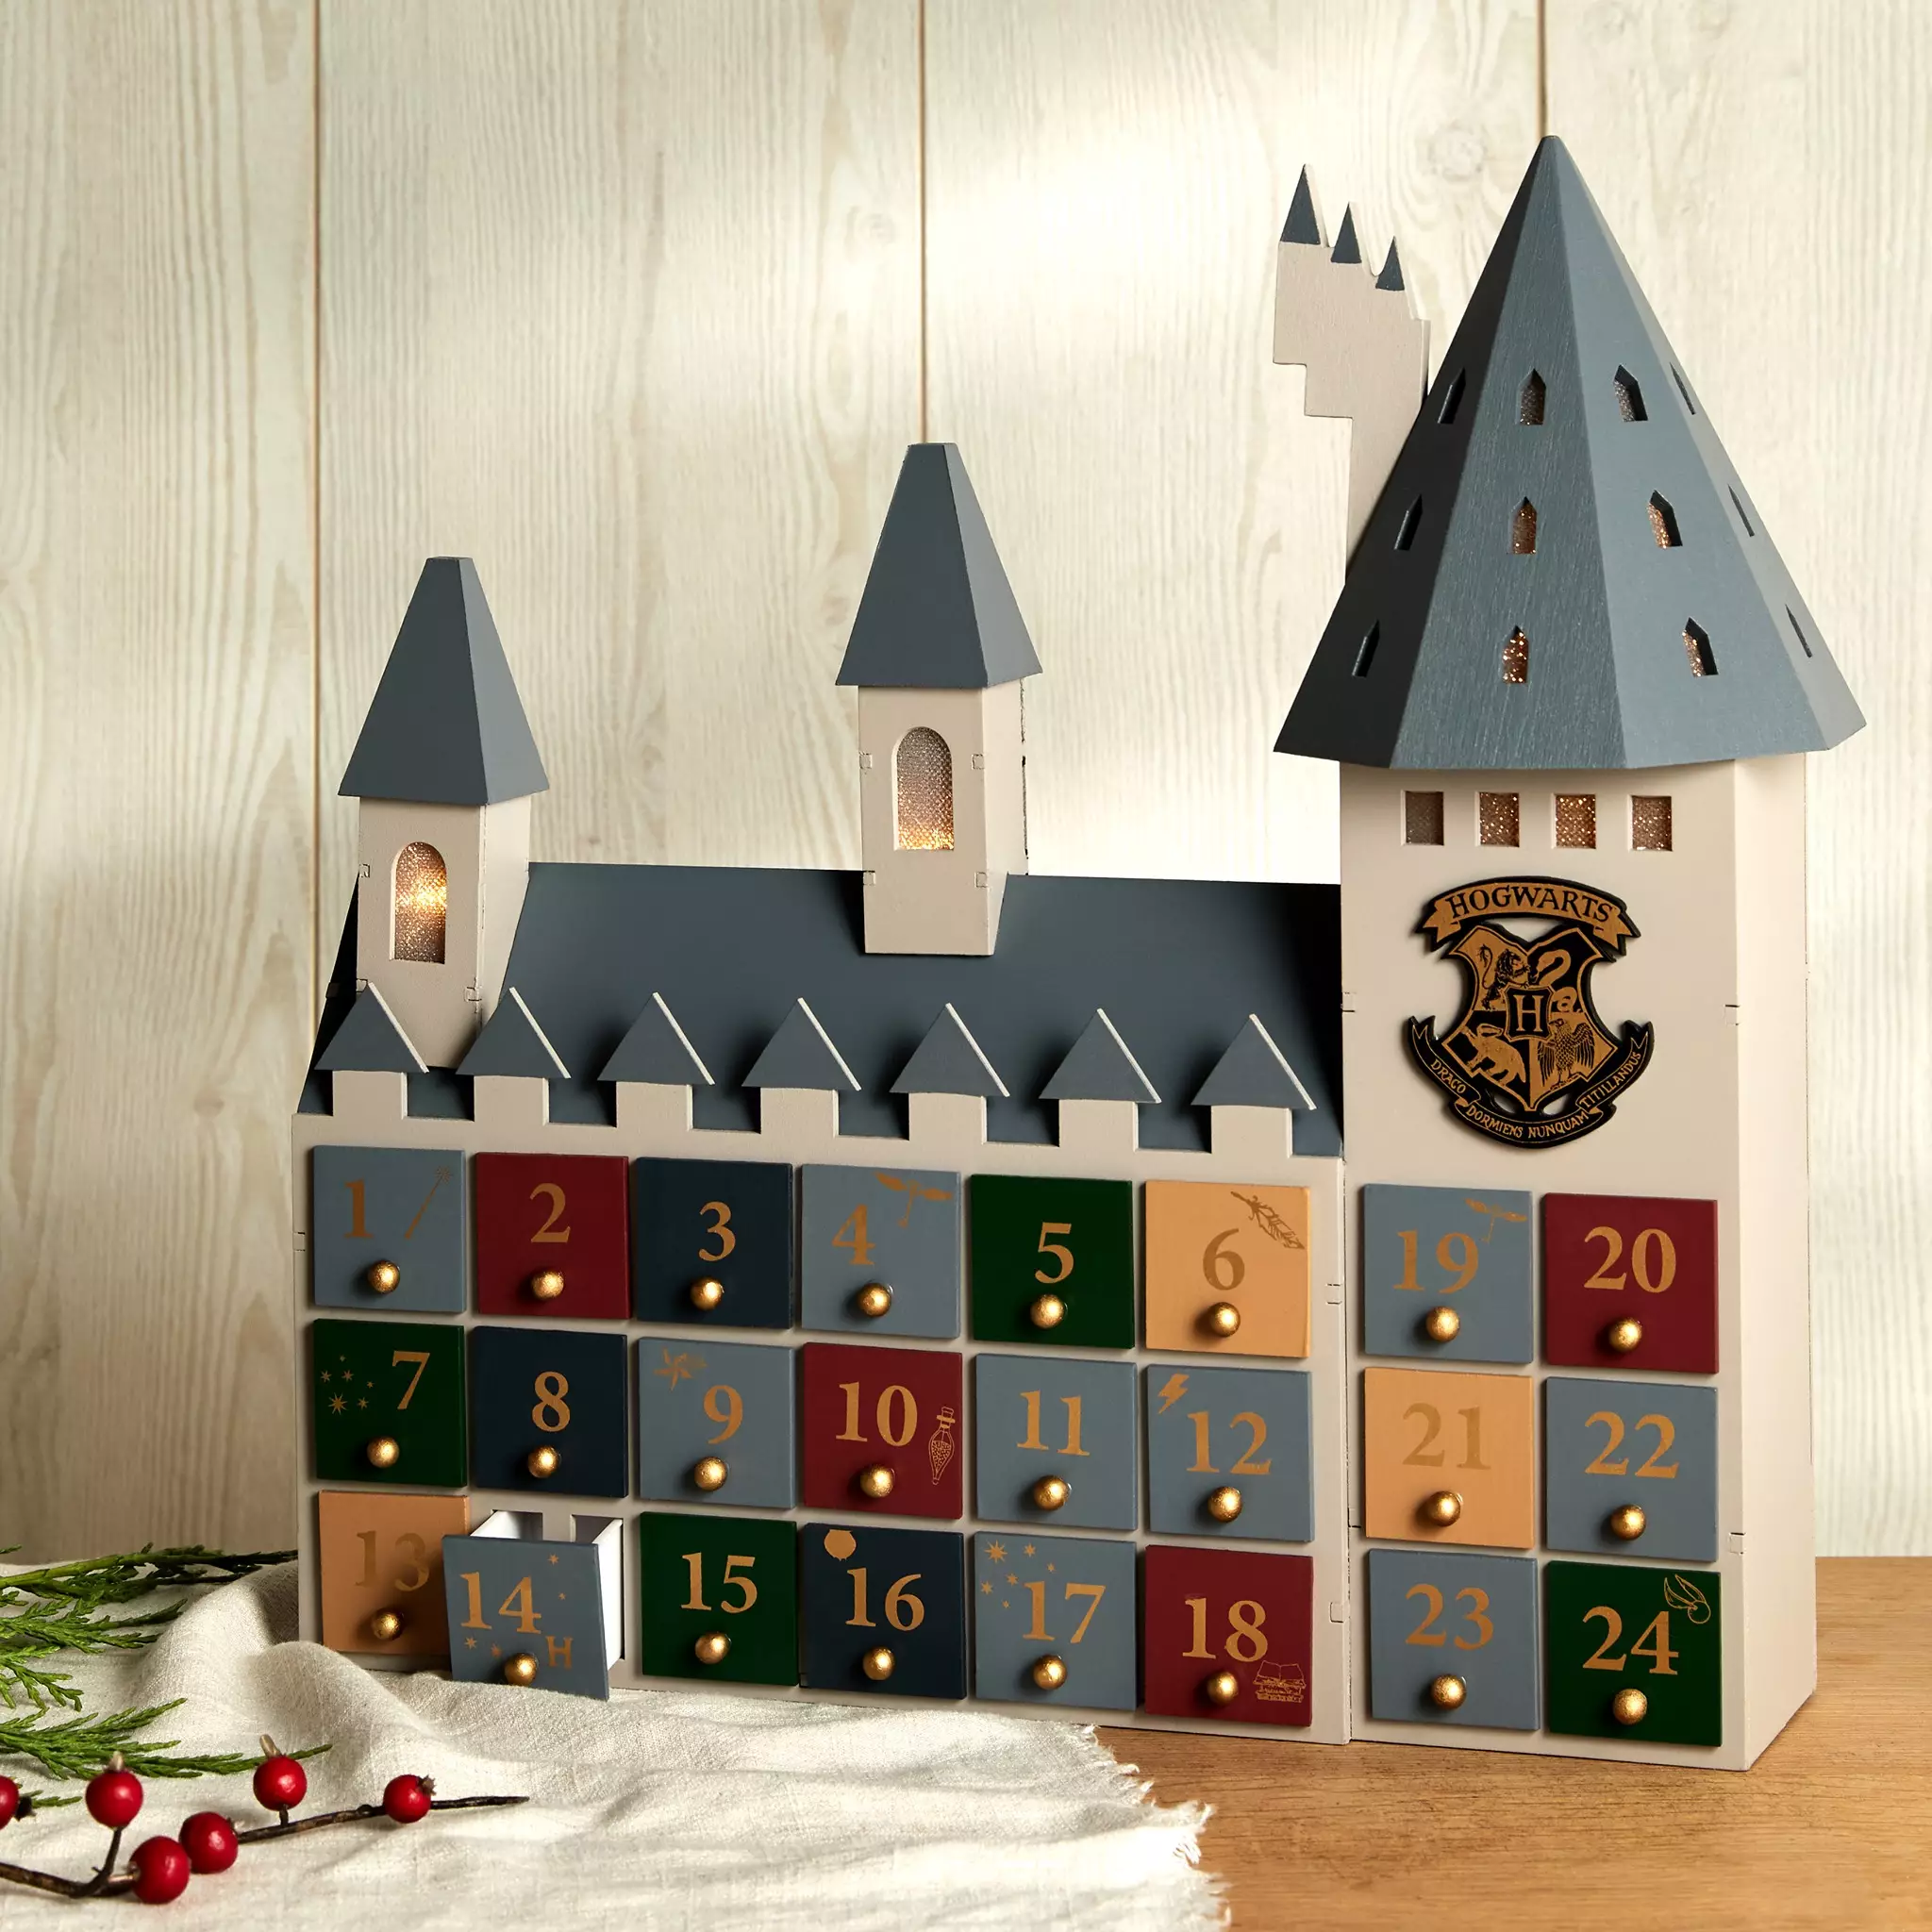 The Hogwarts themed calendar is priced at £16 (